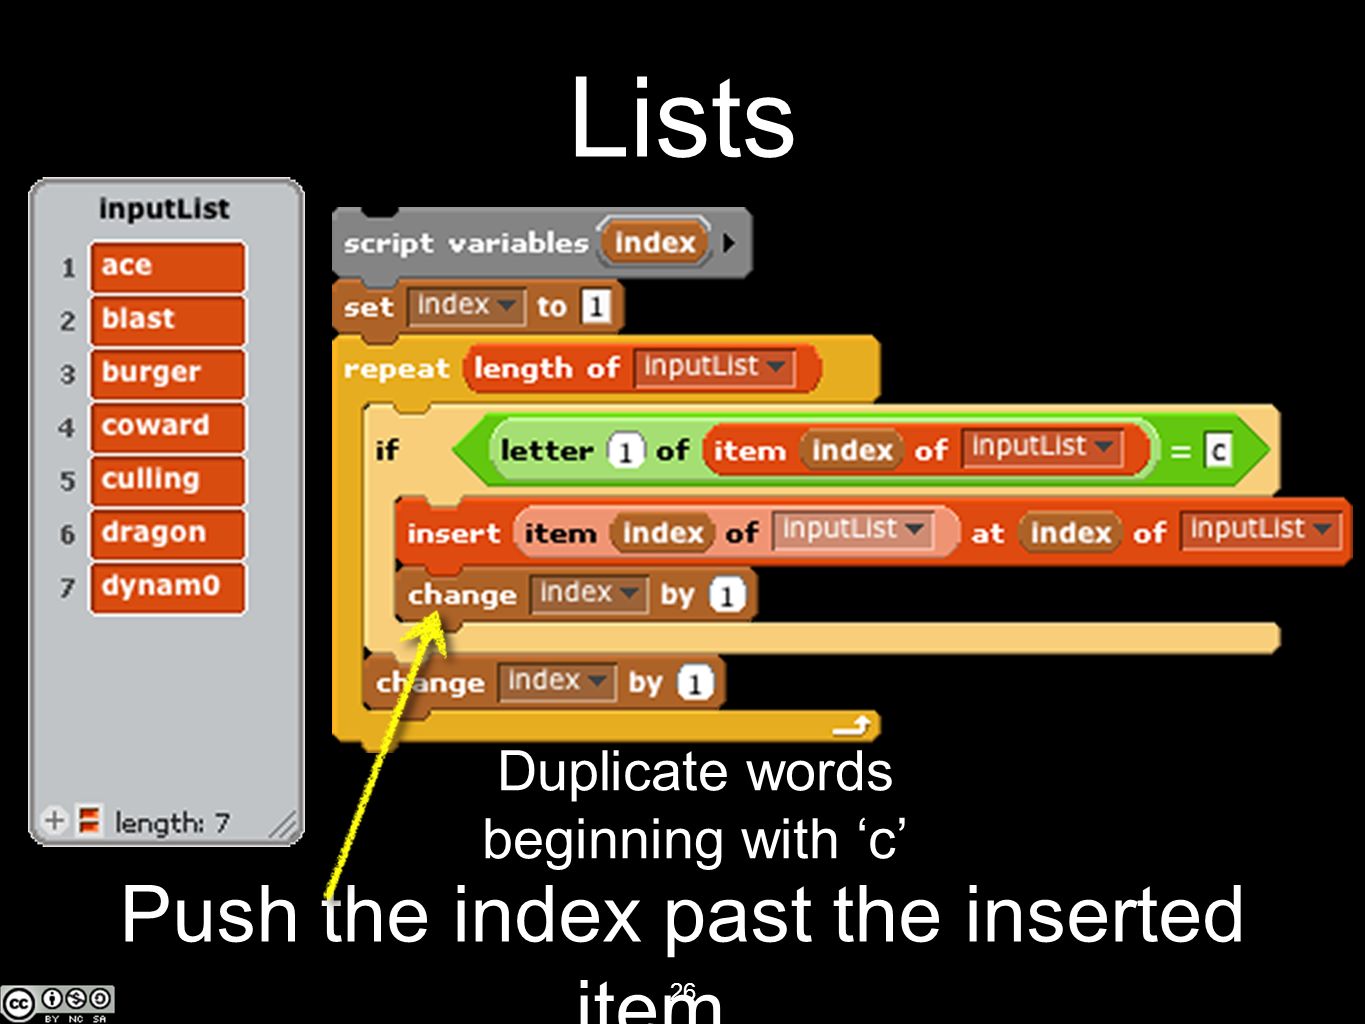 26 Duplicate words beginning with ‘c’ Lists Push the index past the inserted item...